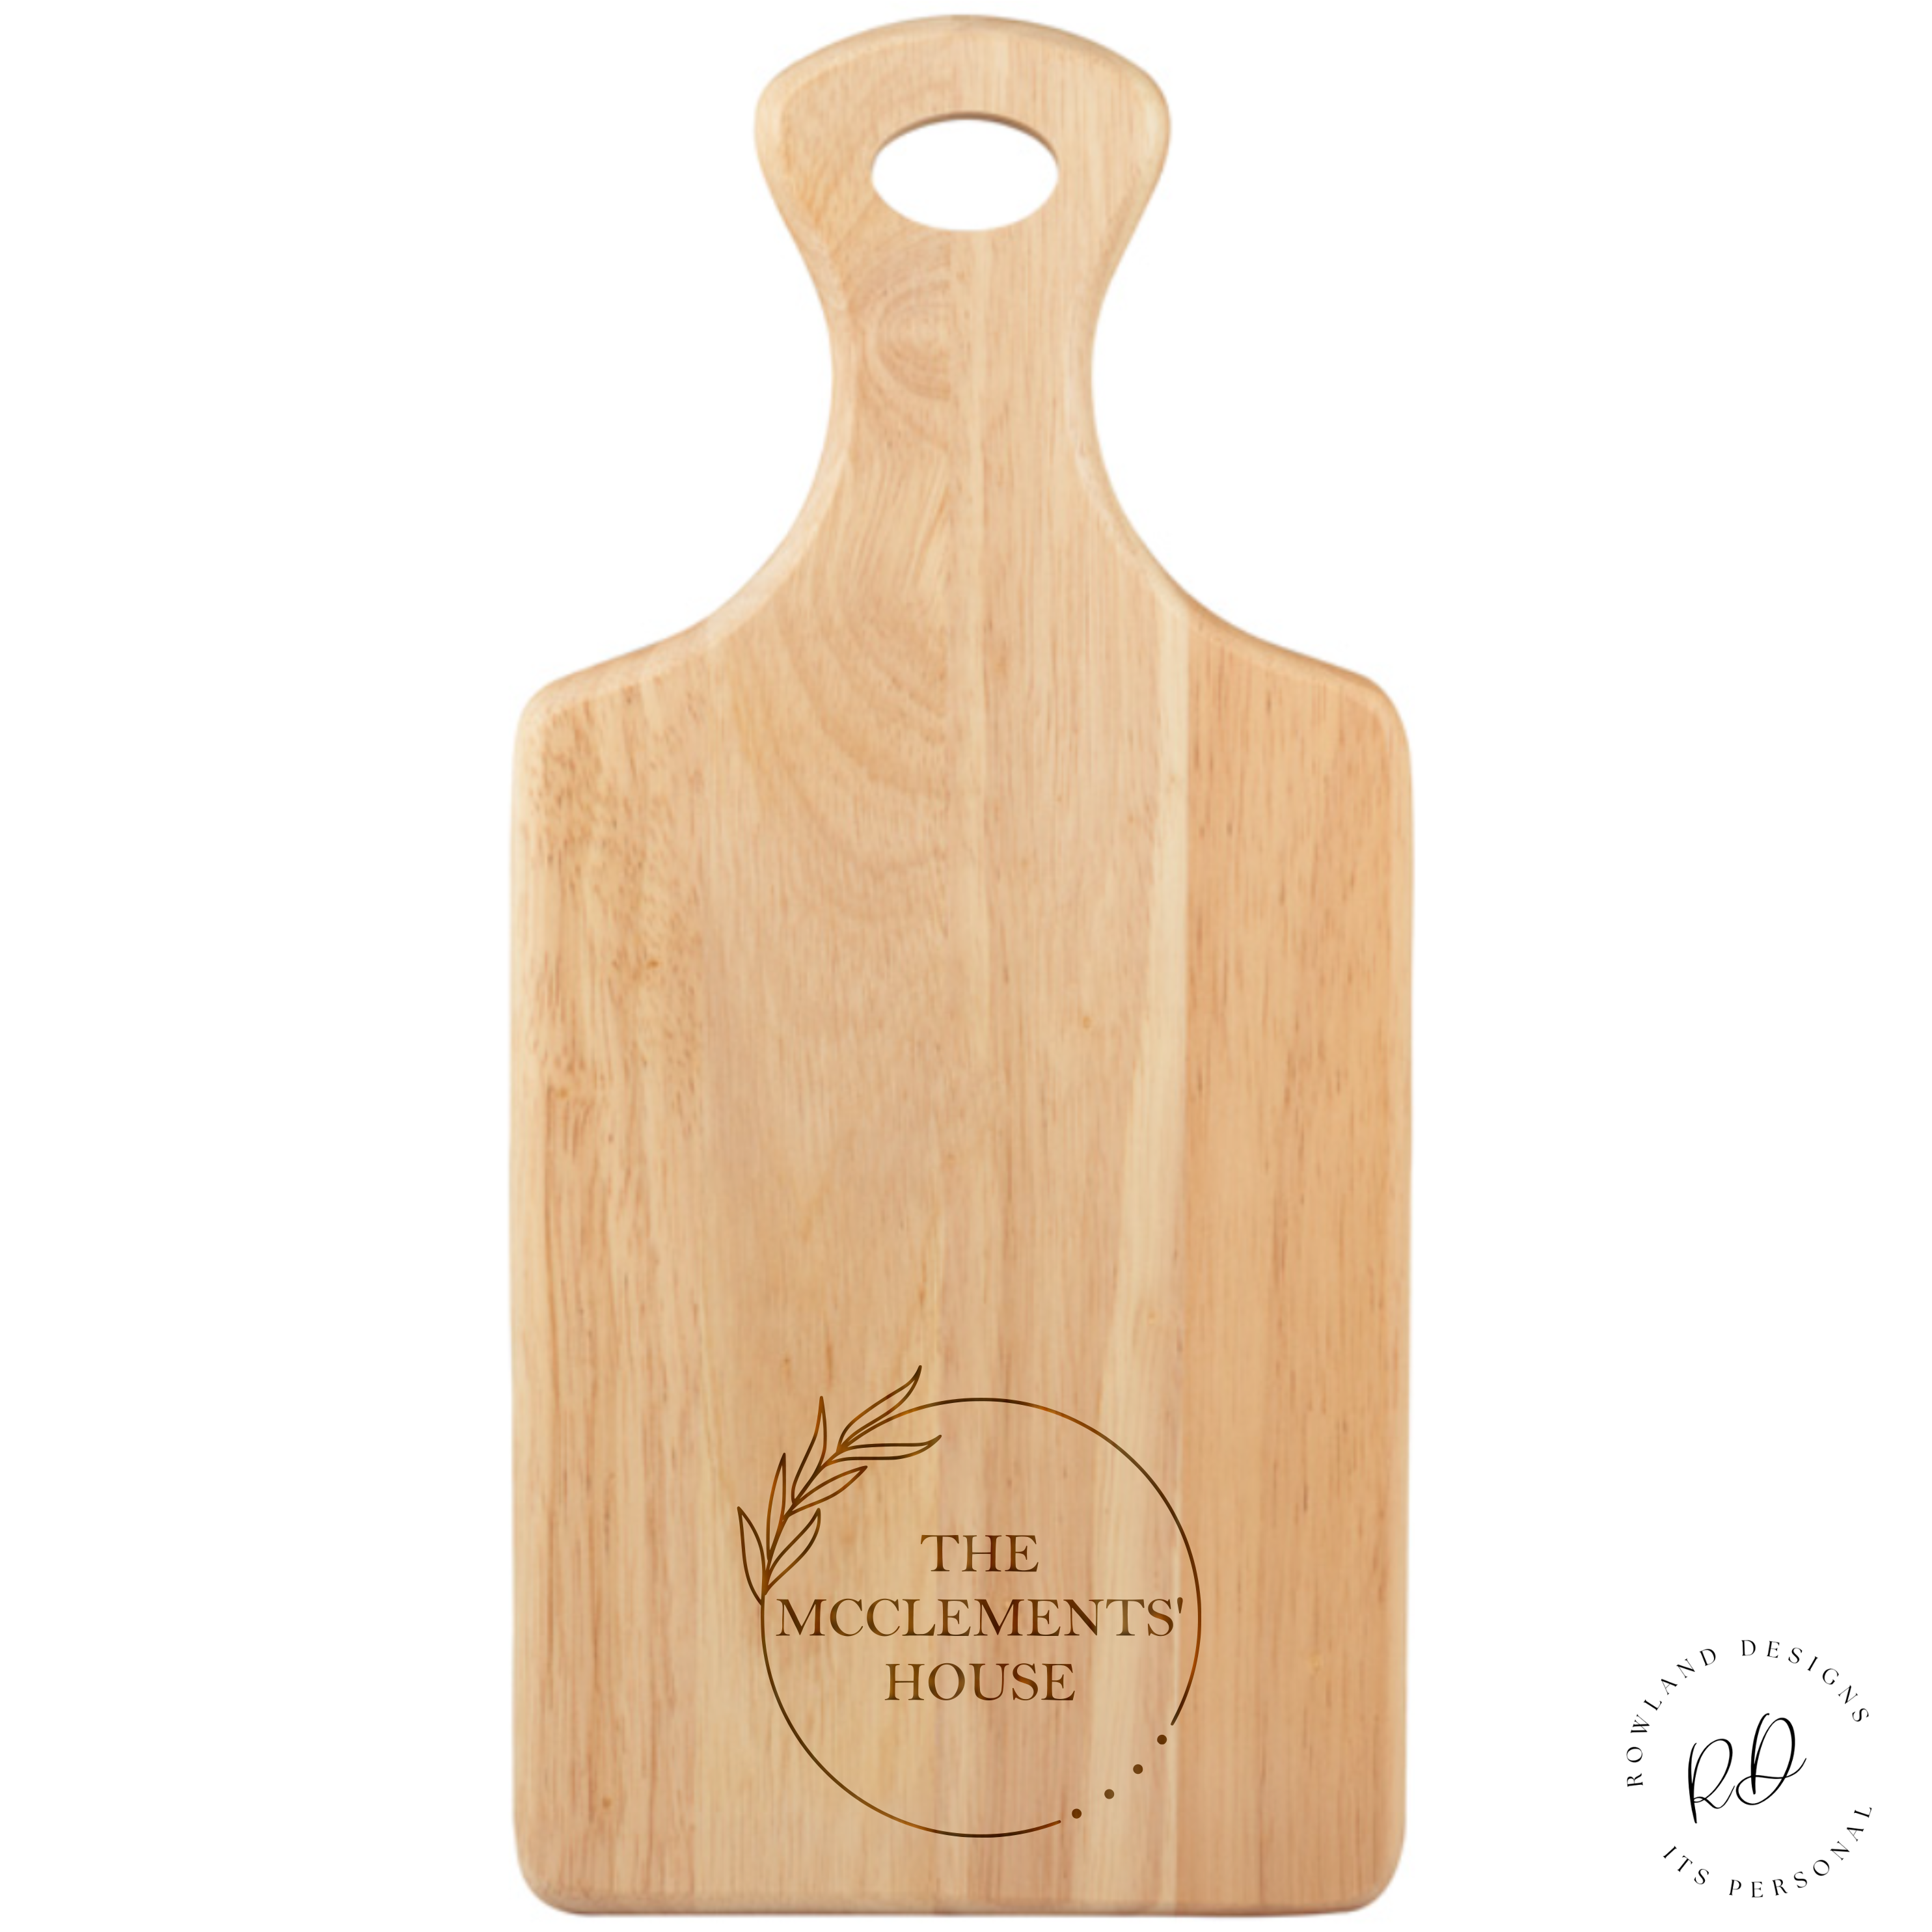 Personalised Serving Board with Leaf Design. Personalised serving board: Perfect for any occasion. Laser engraving for customisation. Dimensions: 345mm width, 170mm depth, 1.5cm height/thickness. Made from beech wood. Hand wash only.